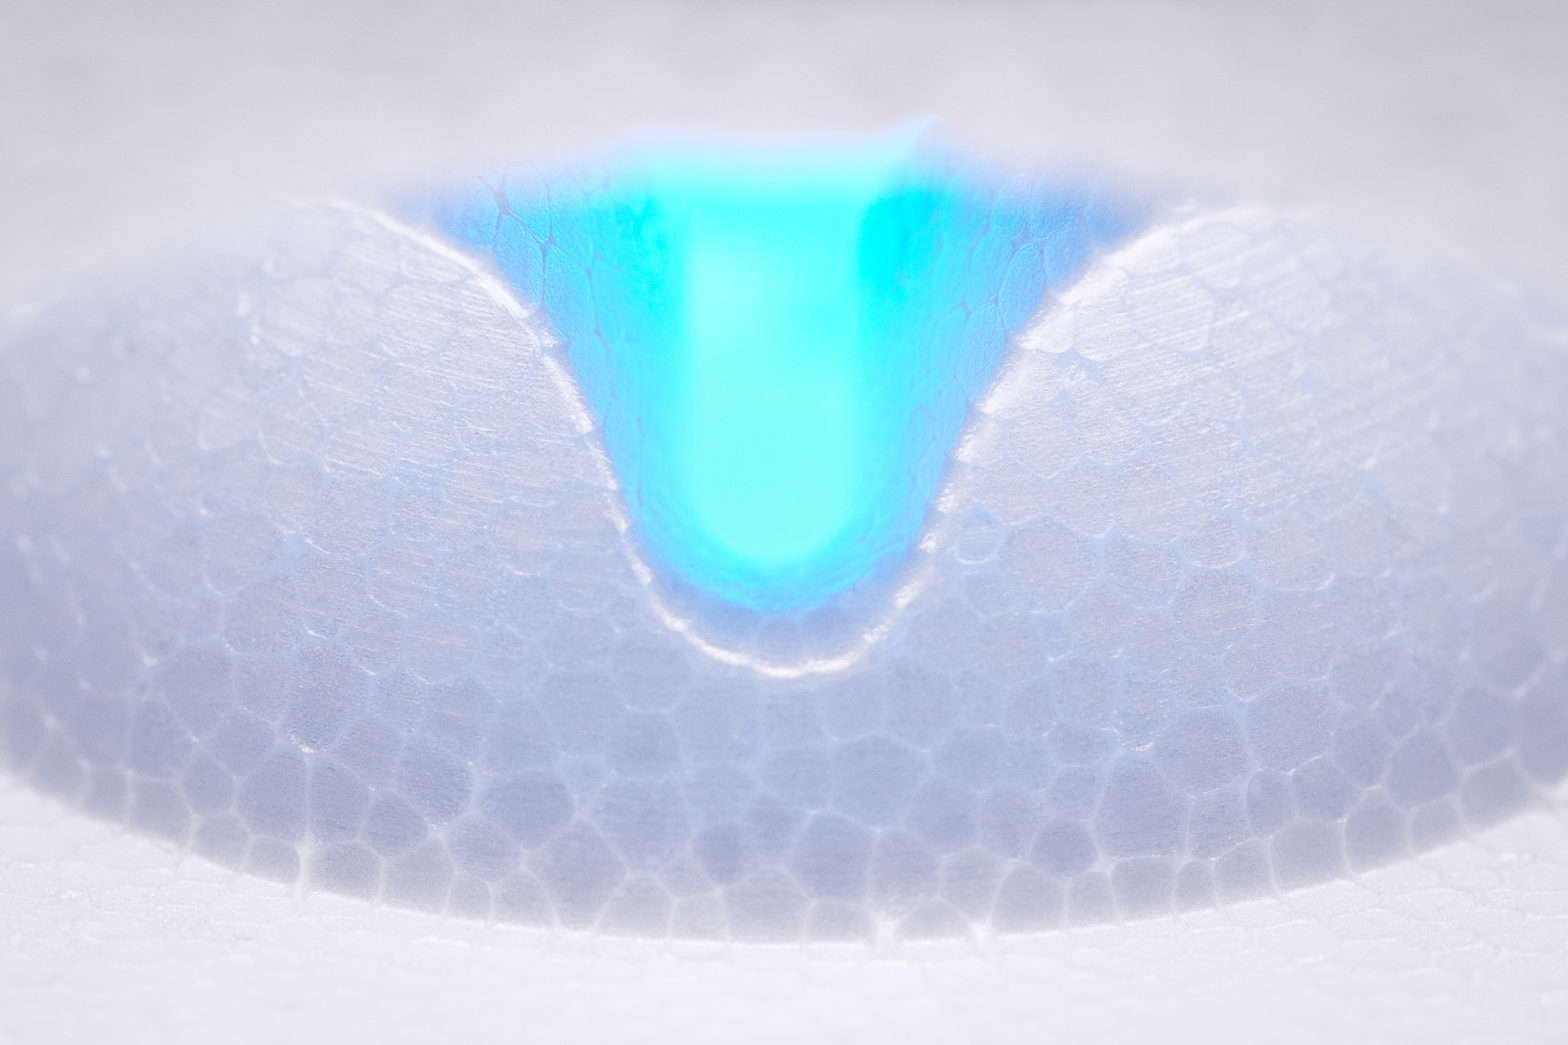 A closeup of styrofoam with perforations forming a pattern in the middle and blue light shining through the middle